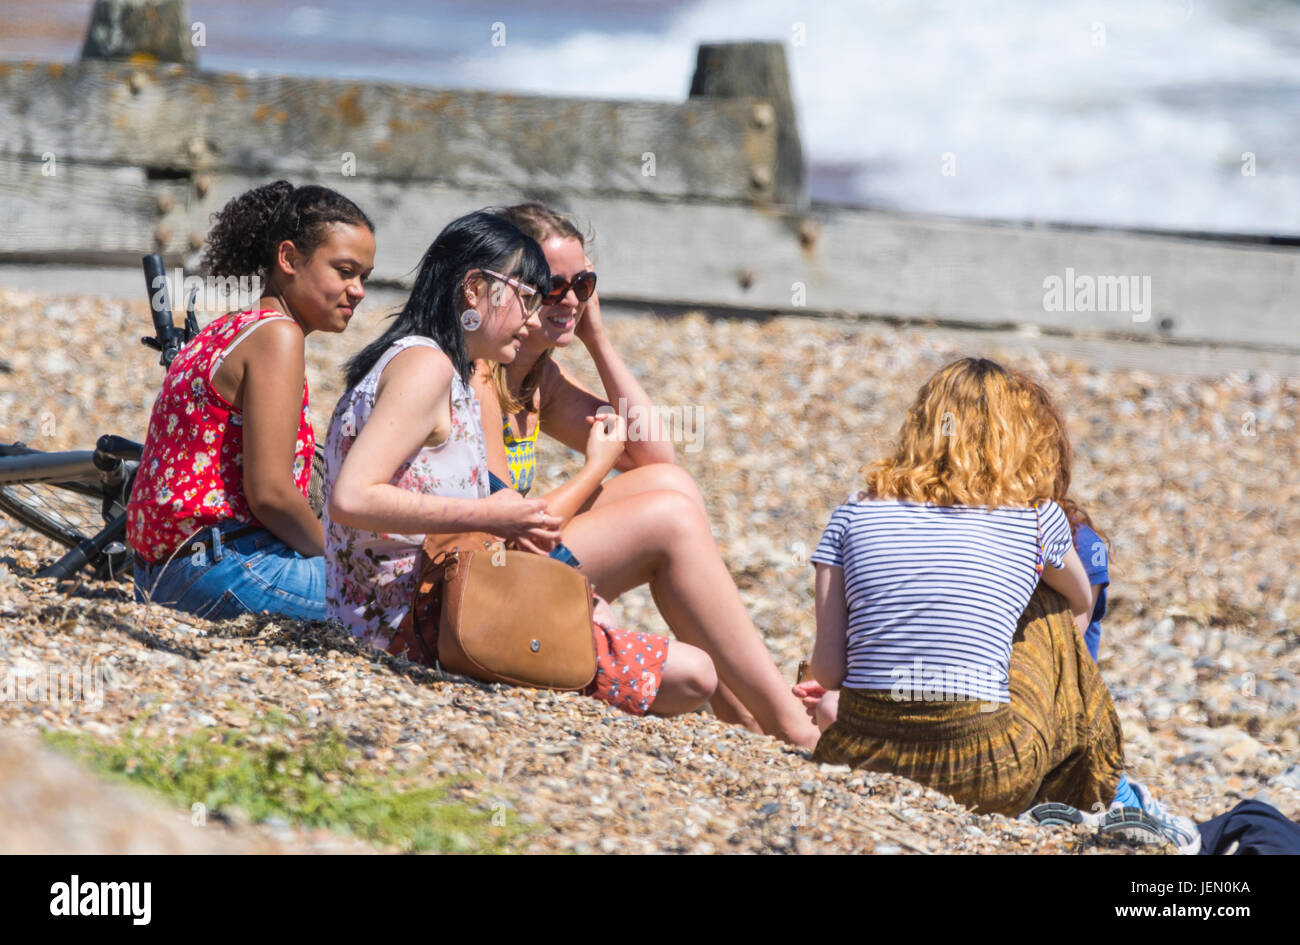 A group of young people of different ethnicities sitting on a beach together enjoying hot wearing at the seaside in Summer in the UK. Stock Photo